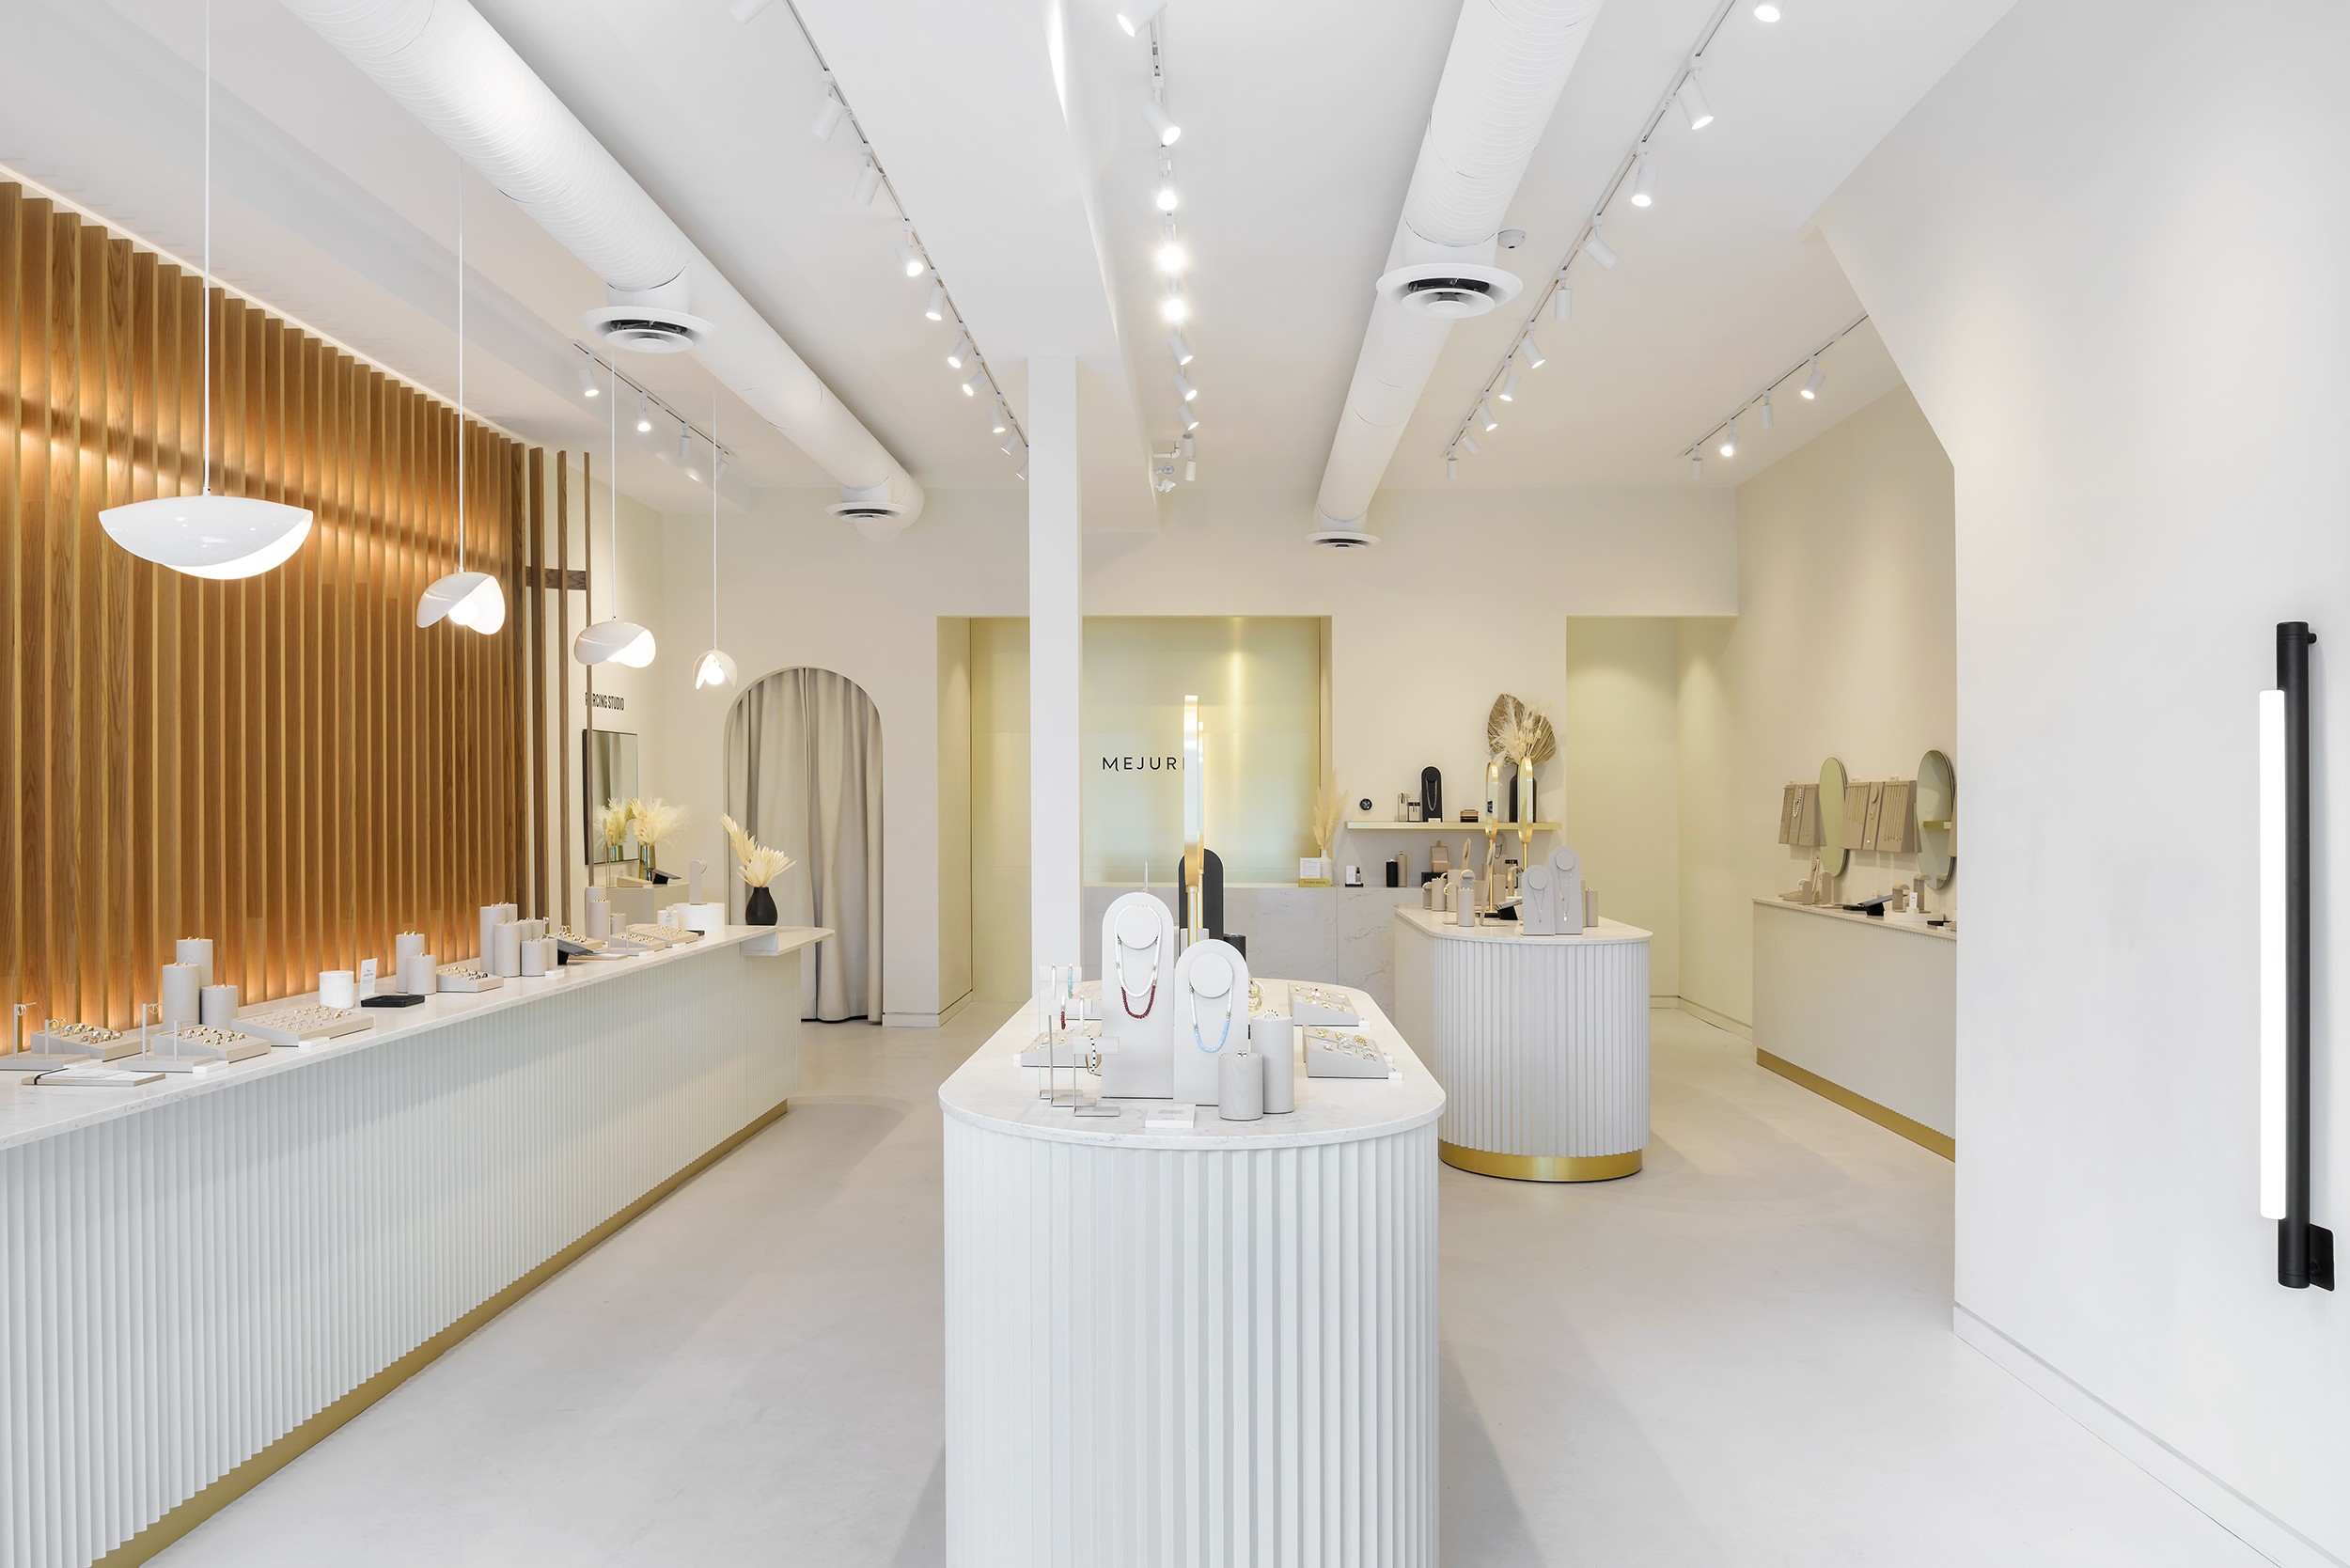 Retail jewellery store display, , Mejuri in 2166 W. 4th Avenue, Vancouver BC, by Cutler